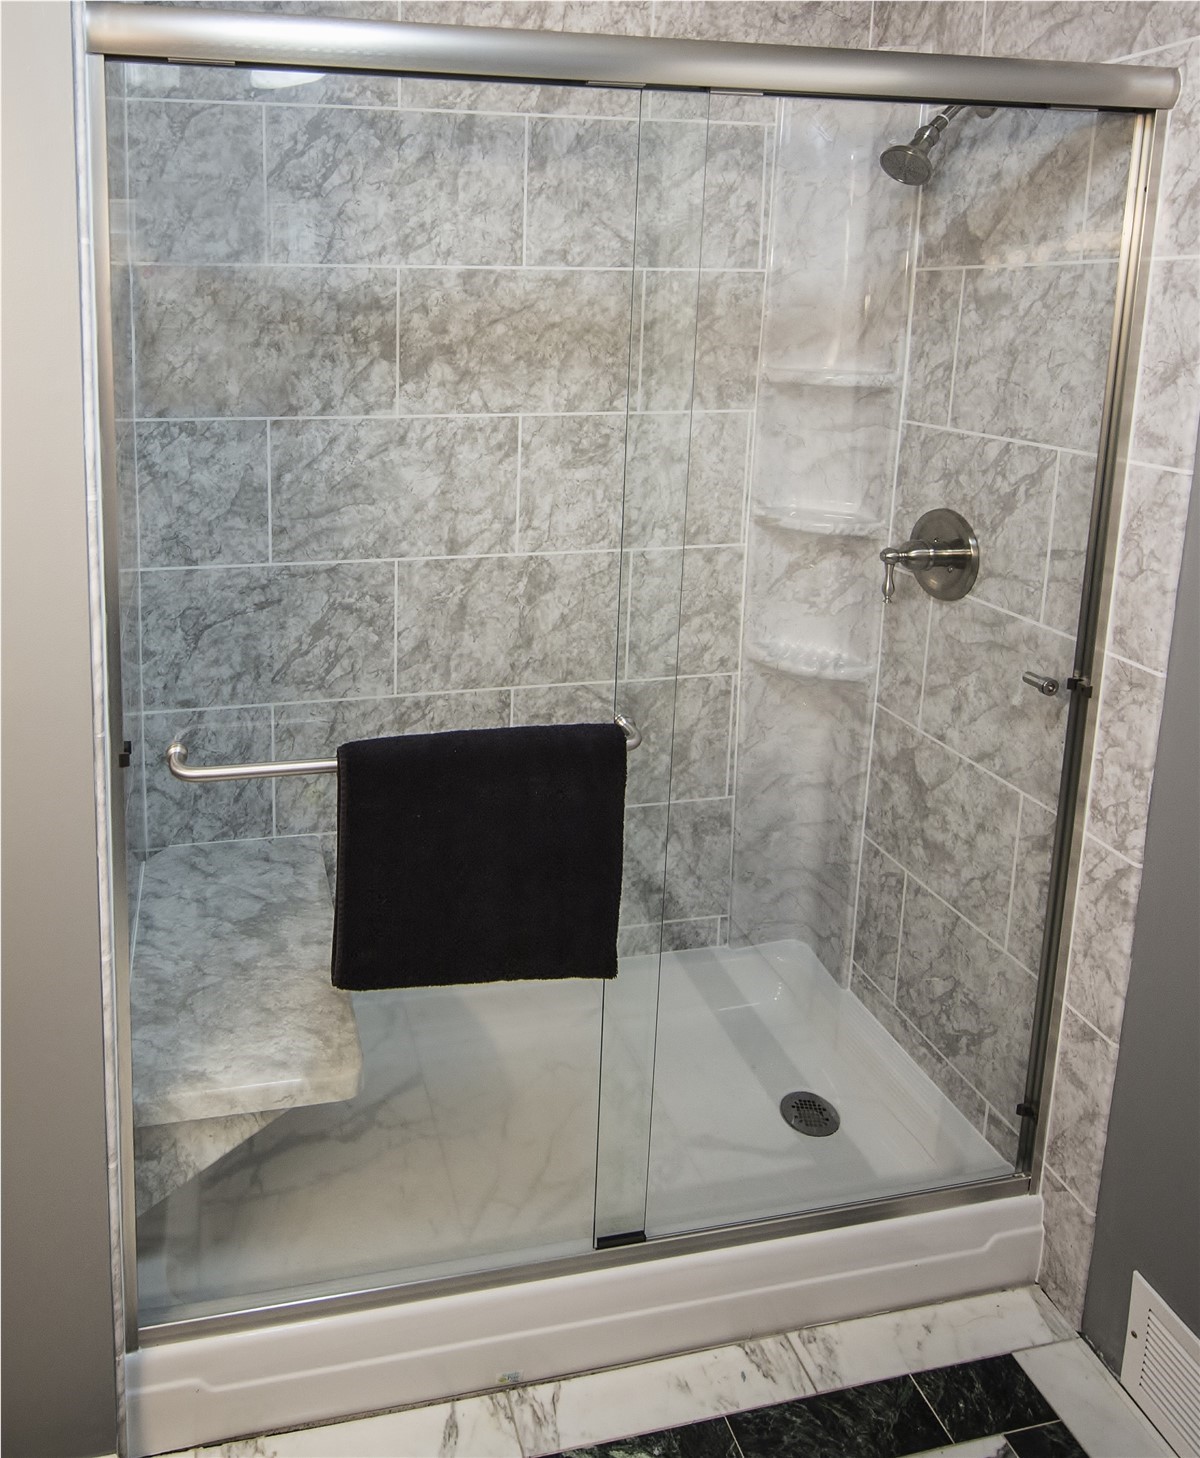 Can I Convert My Tub or Shower?